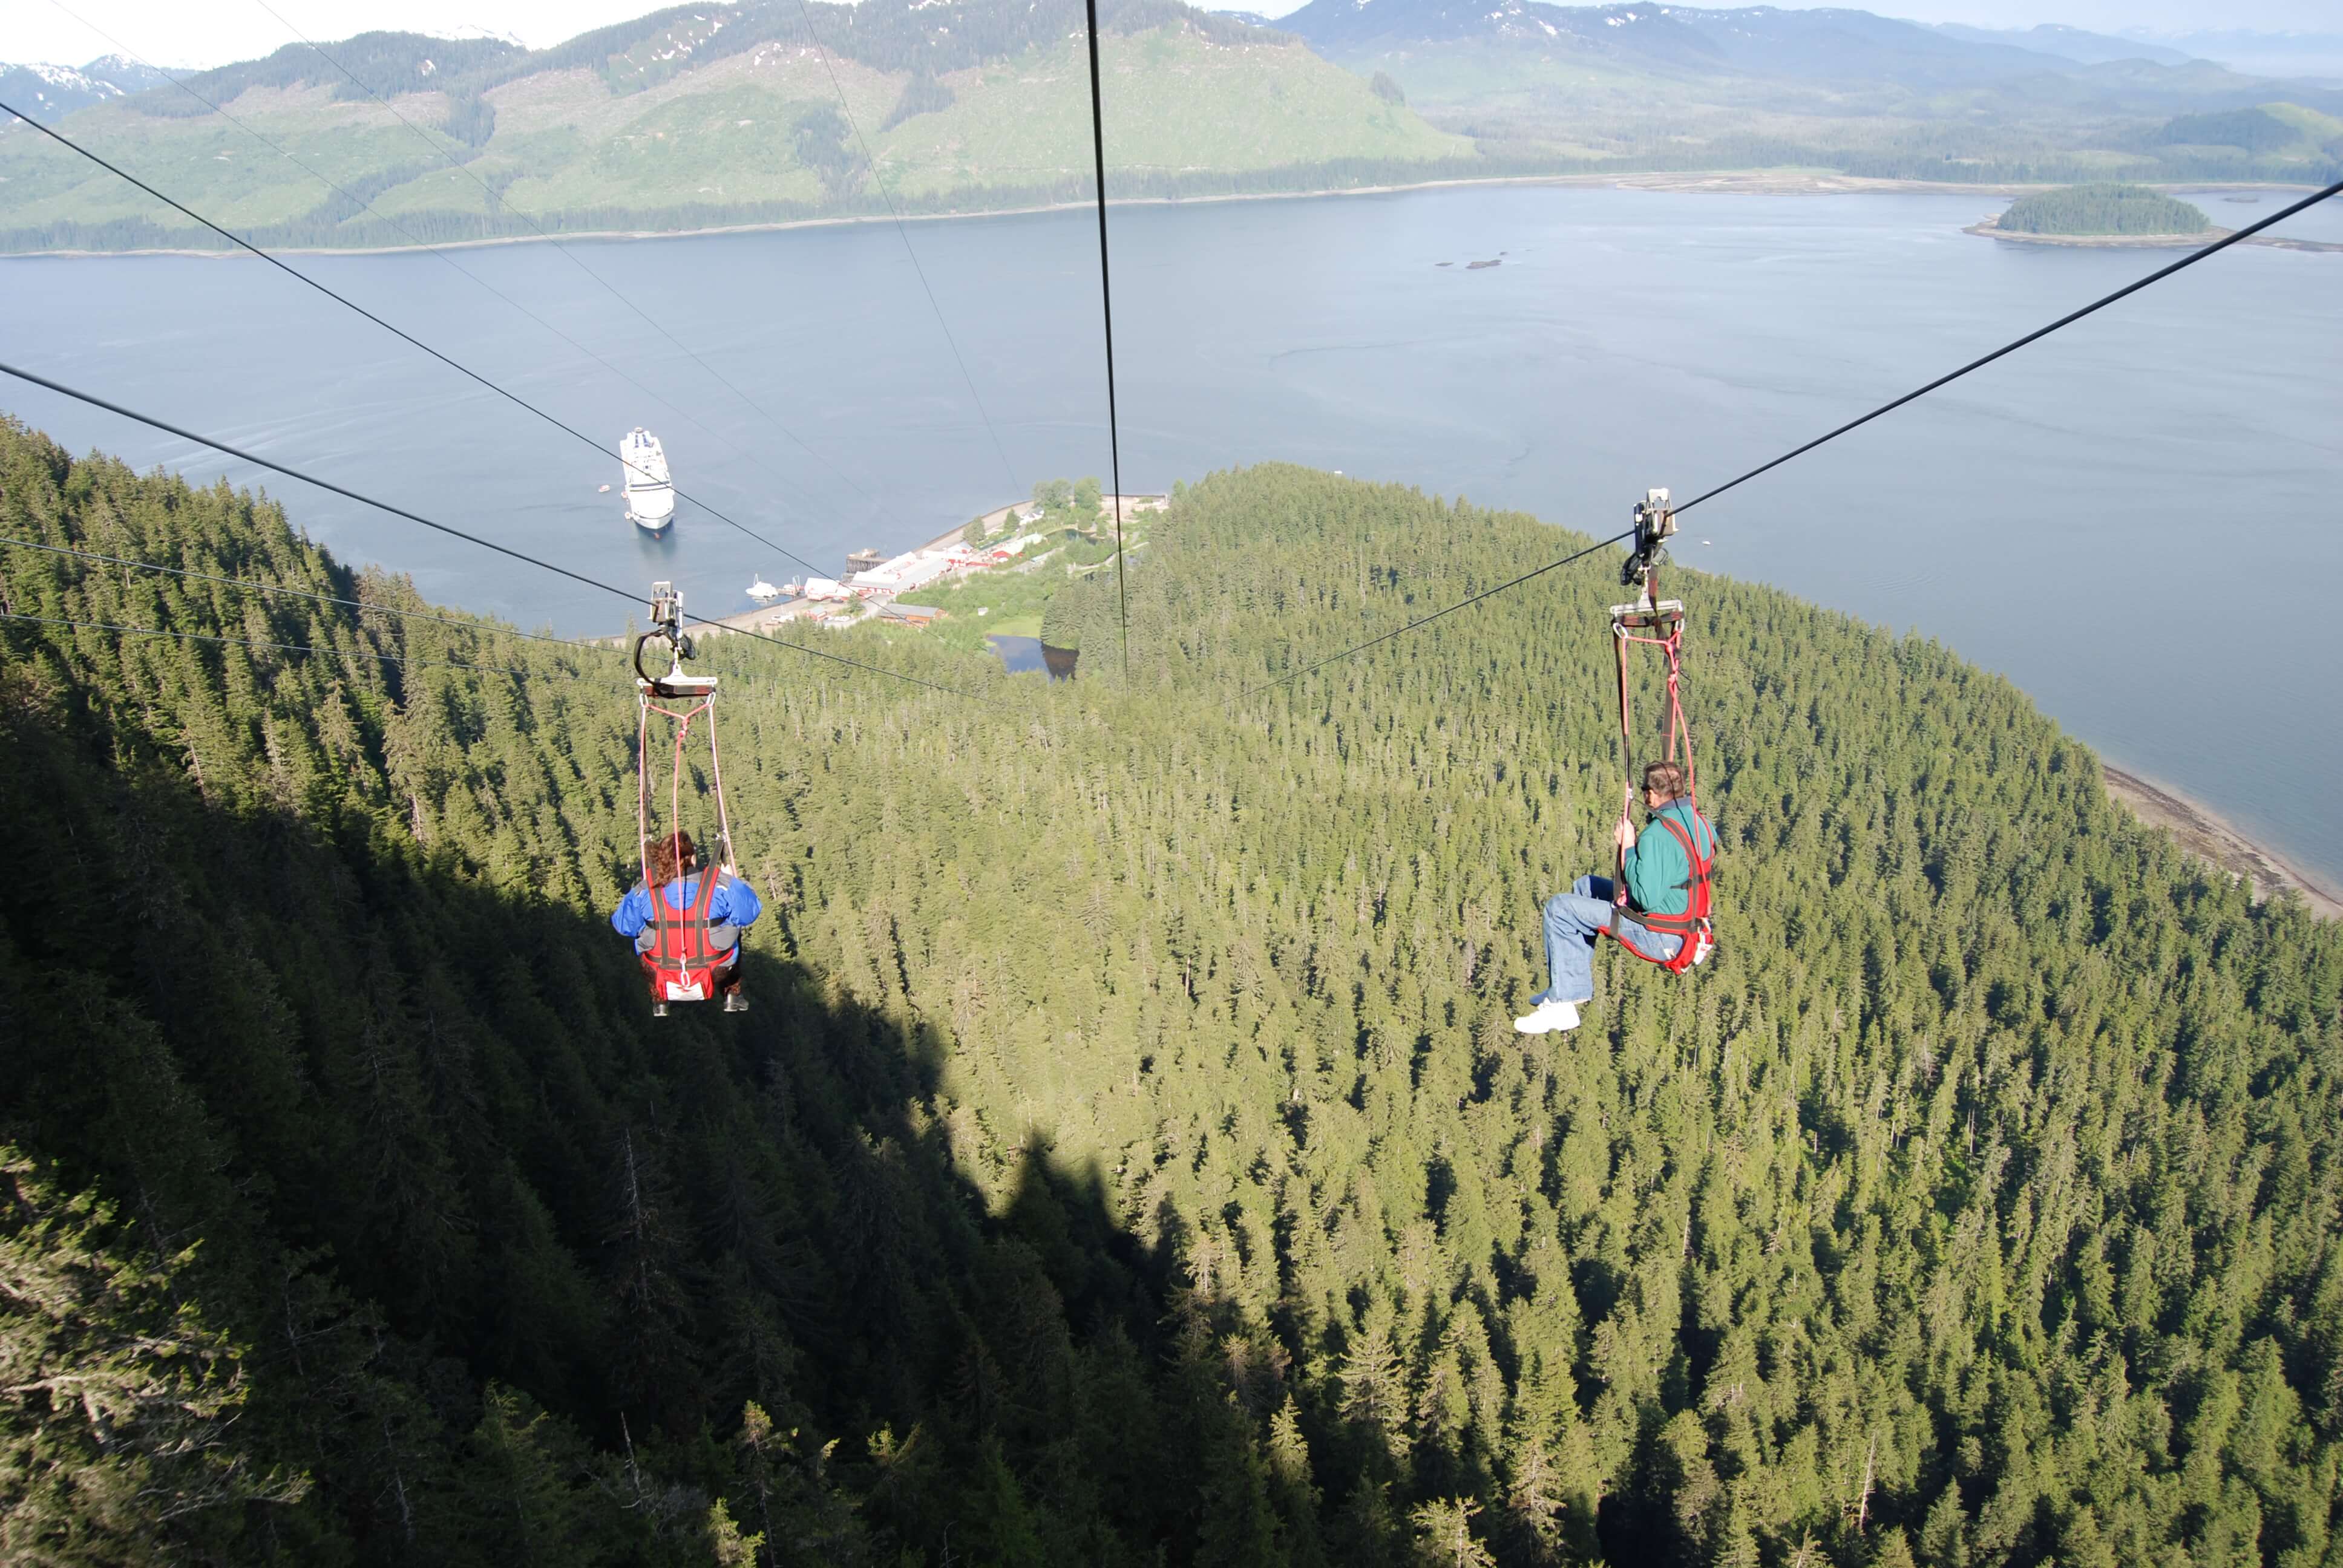 two or 2 people going down zip line or ziplines with view of ocean, Hoonah, Alaska, shore excursion, Icy Strait Point or Pt. PLEASE INCLUDE THE FOLLOWING COPY WHENEVER THIS IMAGE IS USED - Used with permission of Icy Strait Point and Huna Totem Corporation